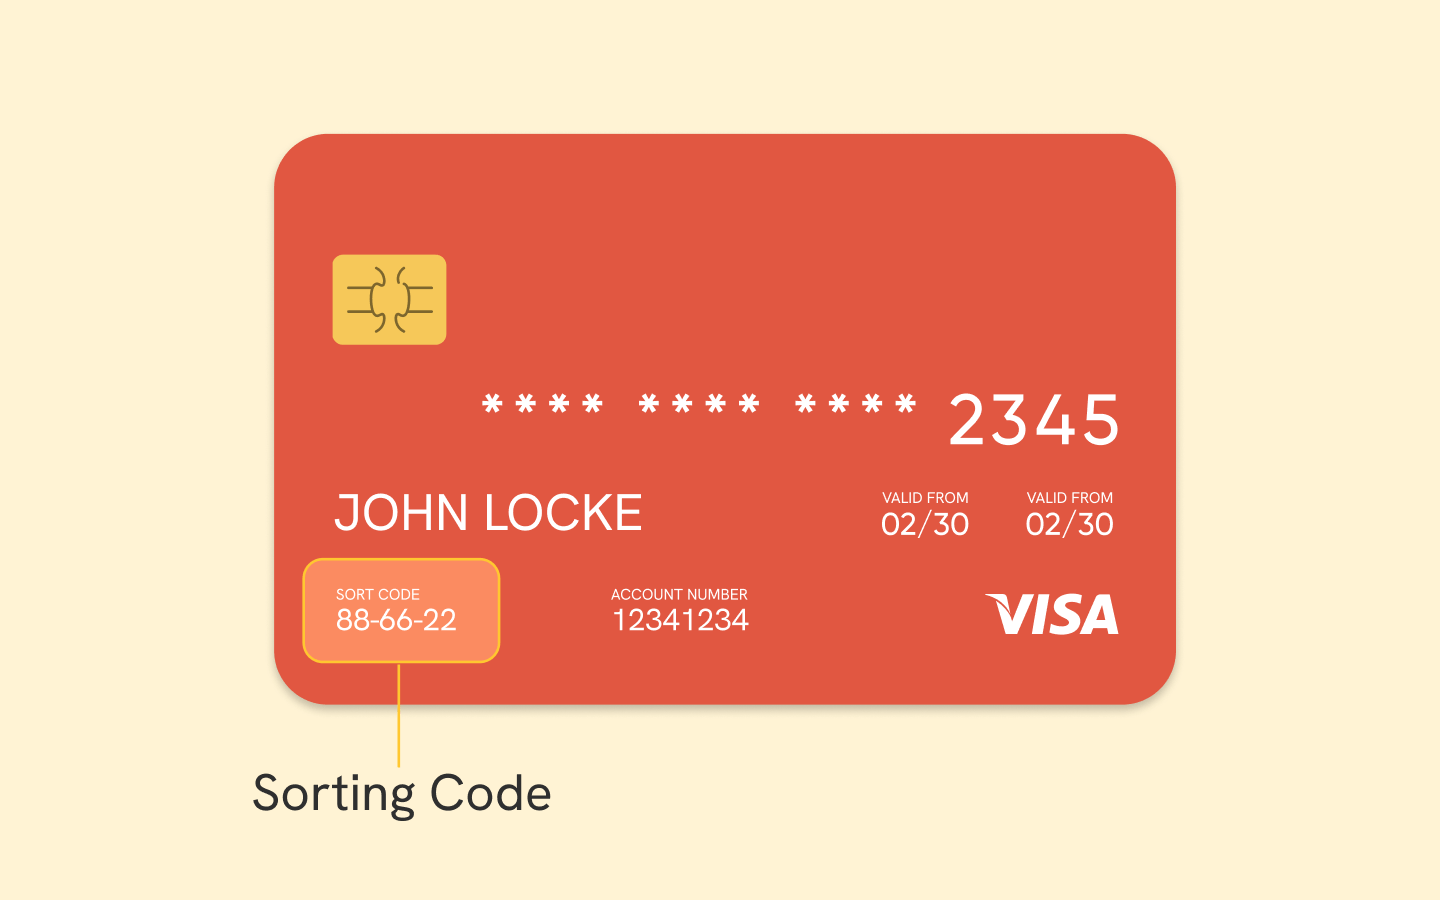 An annotated card showing where to find the sort code